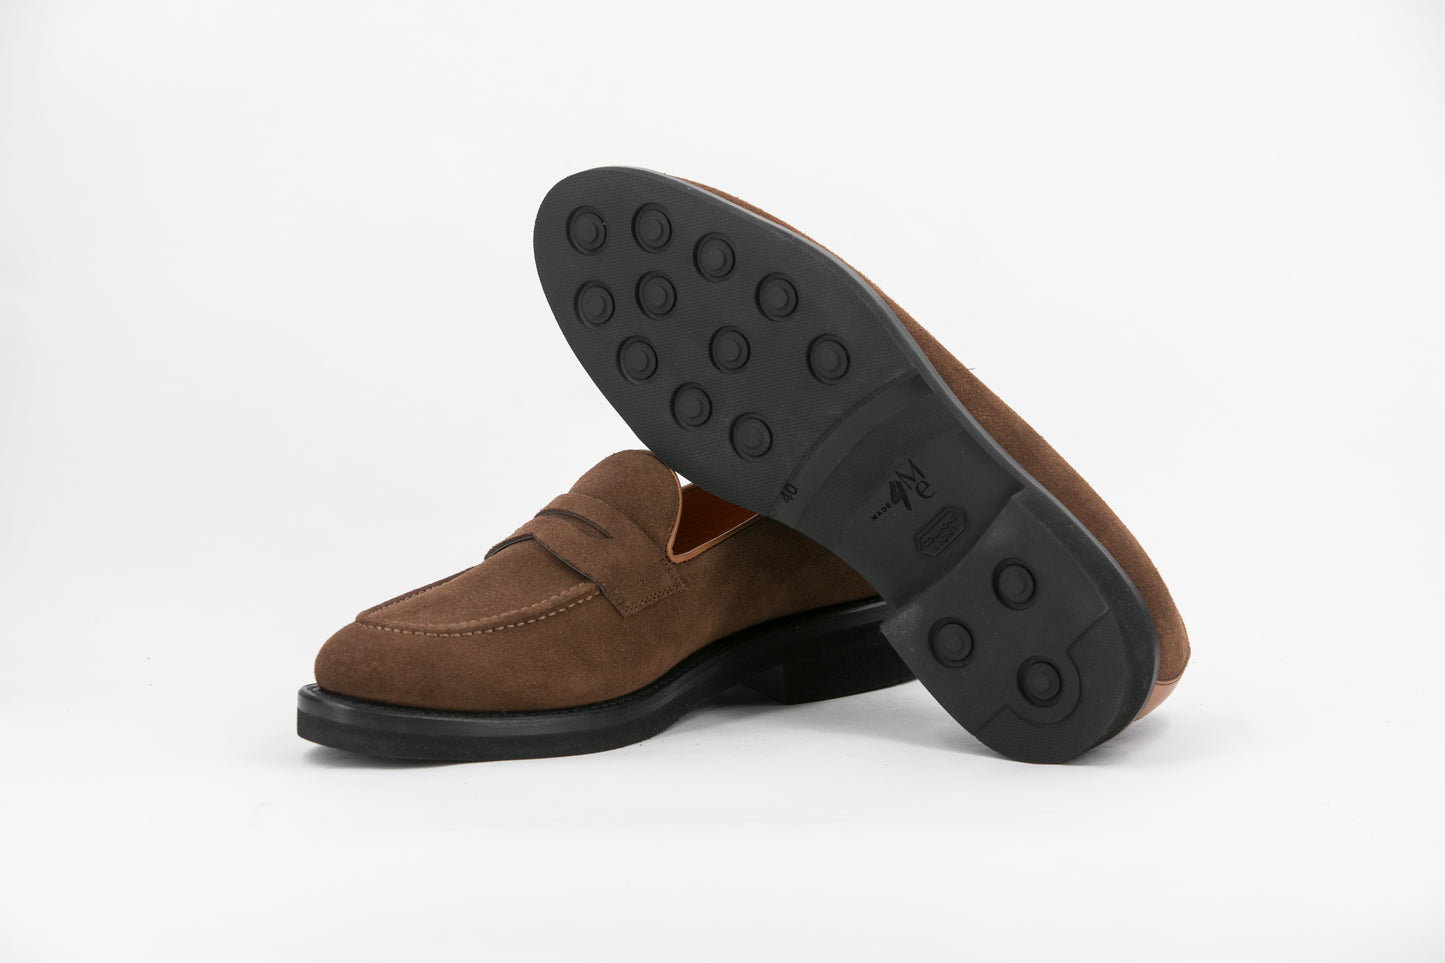 LOAFER SAVILE LUX SUEDE BROWN